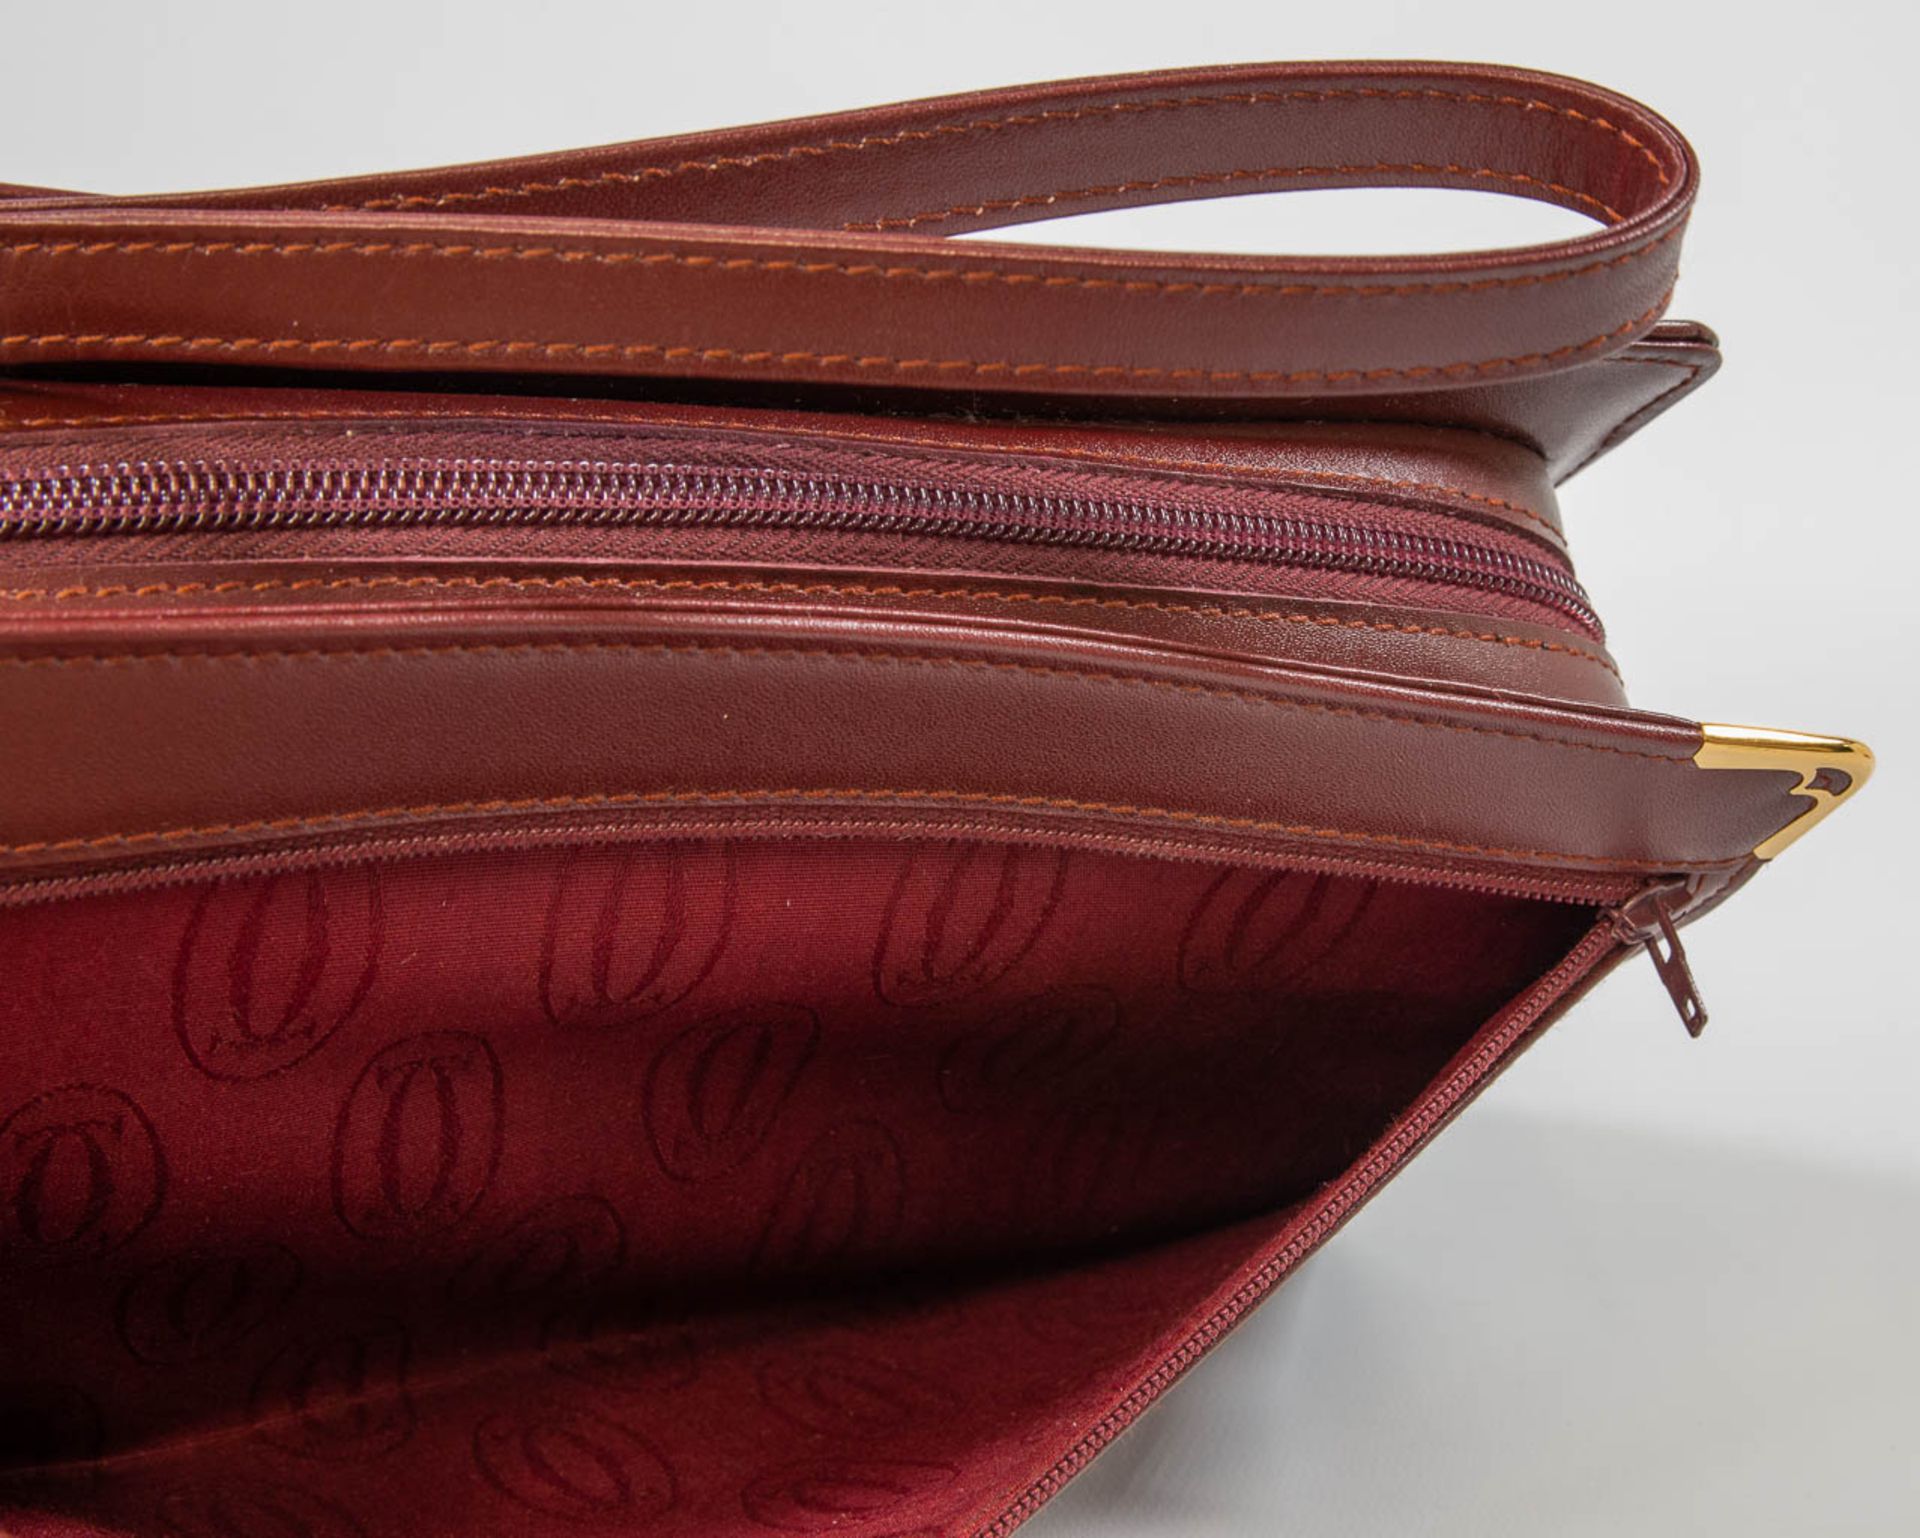 A Must De Cartier brown leather purse or handbag, New condition and in the original box. - Image 16 of 20